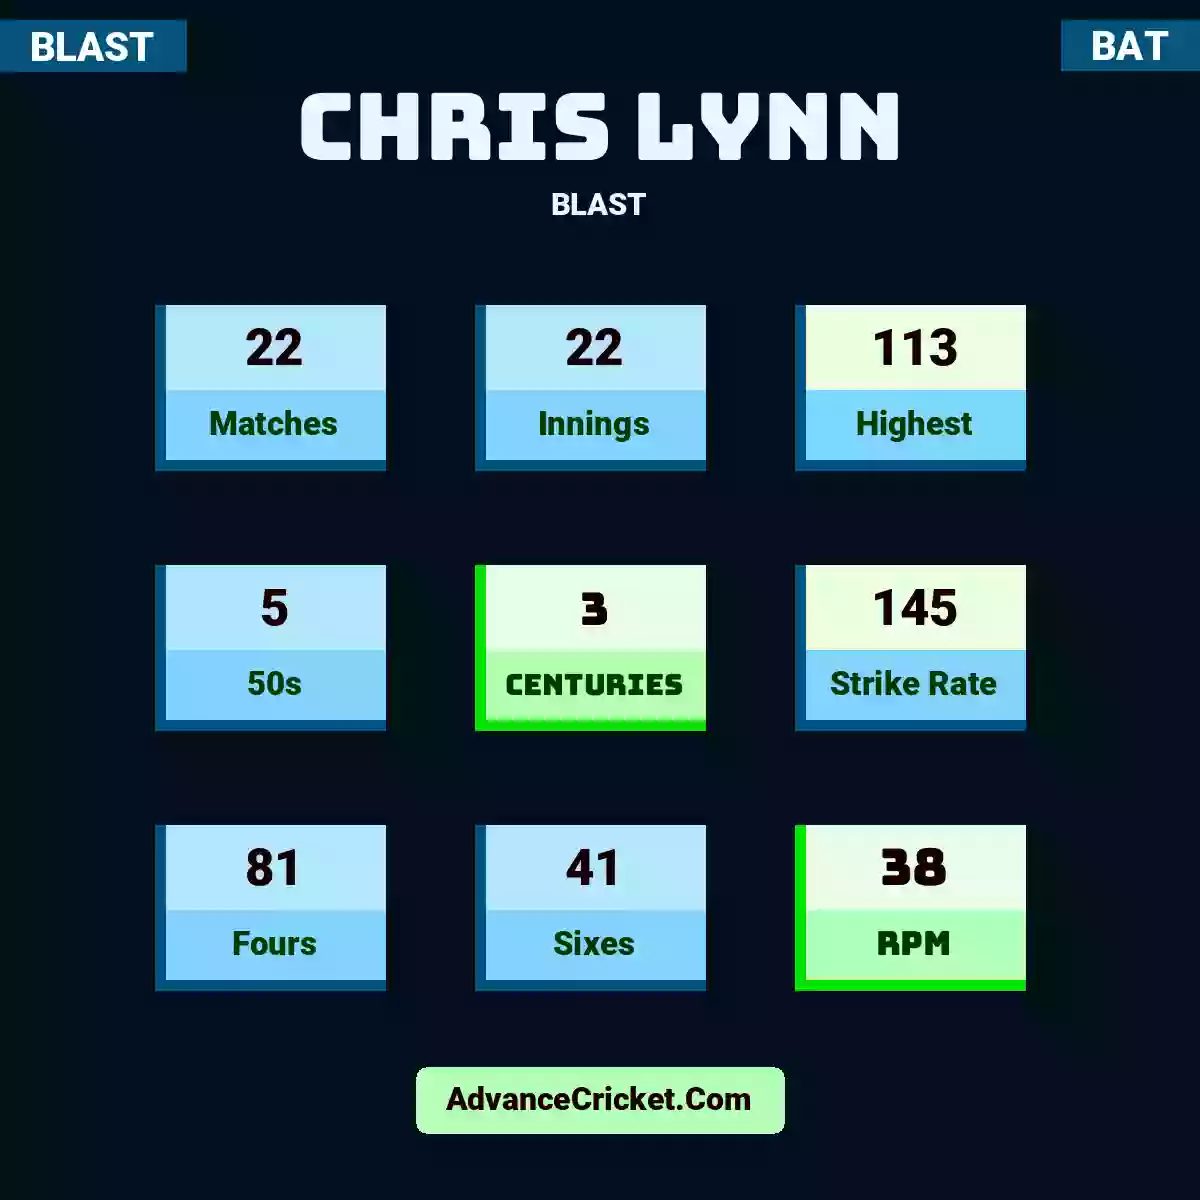 Chris Lynn BLAST , Chris Lynn played 22 matches, scored 113 runs as highest, 5 half-centuries, and 3 centuries, with a strike rate of 145. C.Lynn hit 81 fours and 41 sixes, with an RPM of 38.